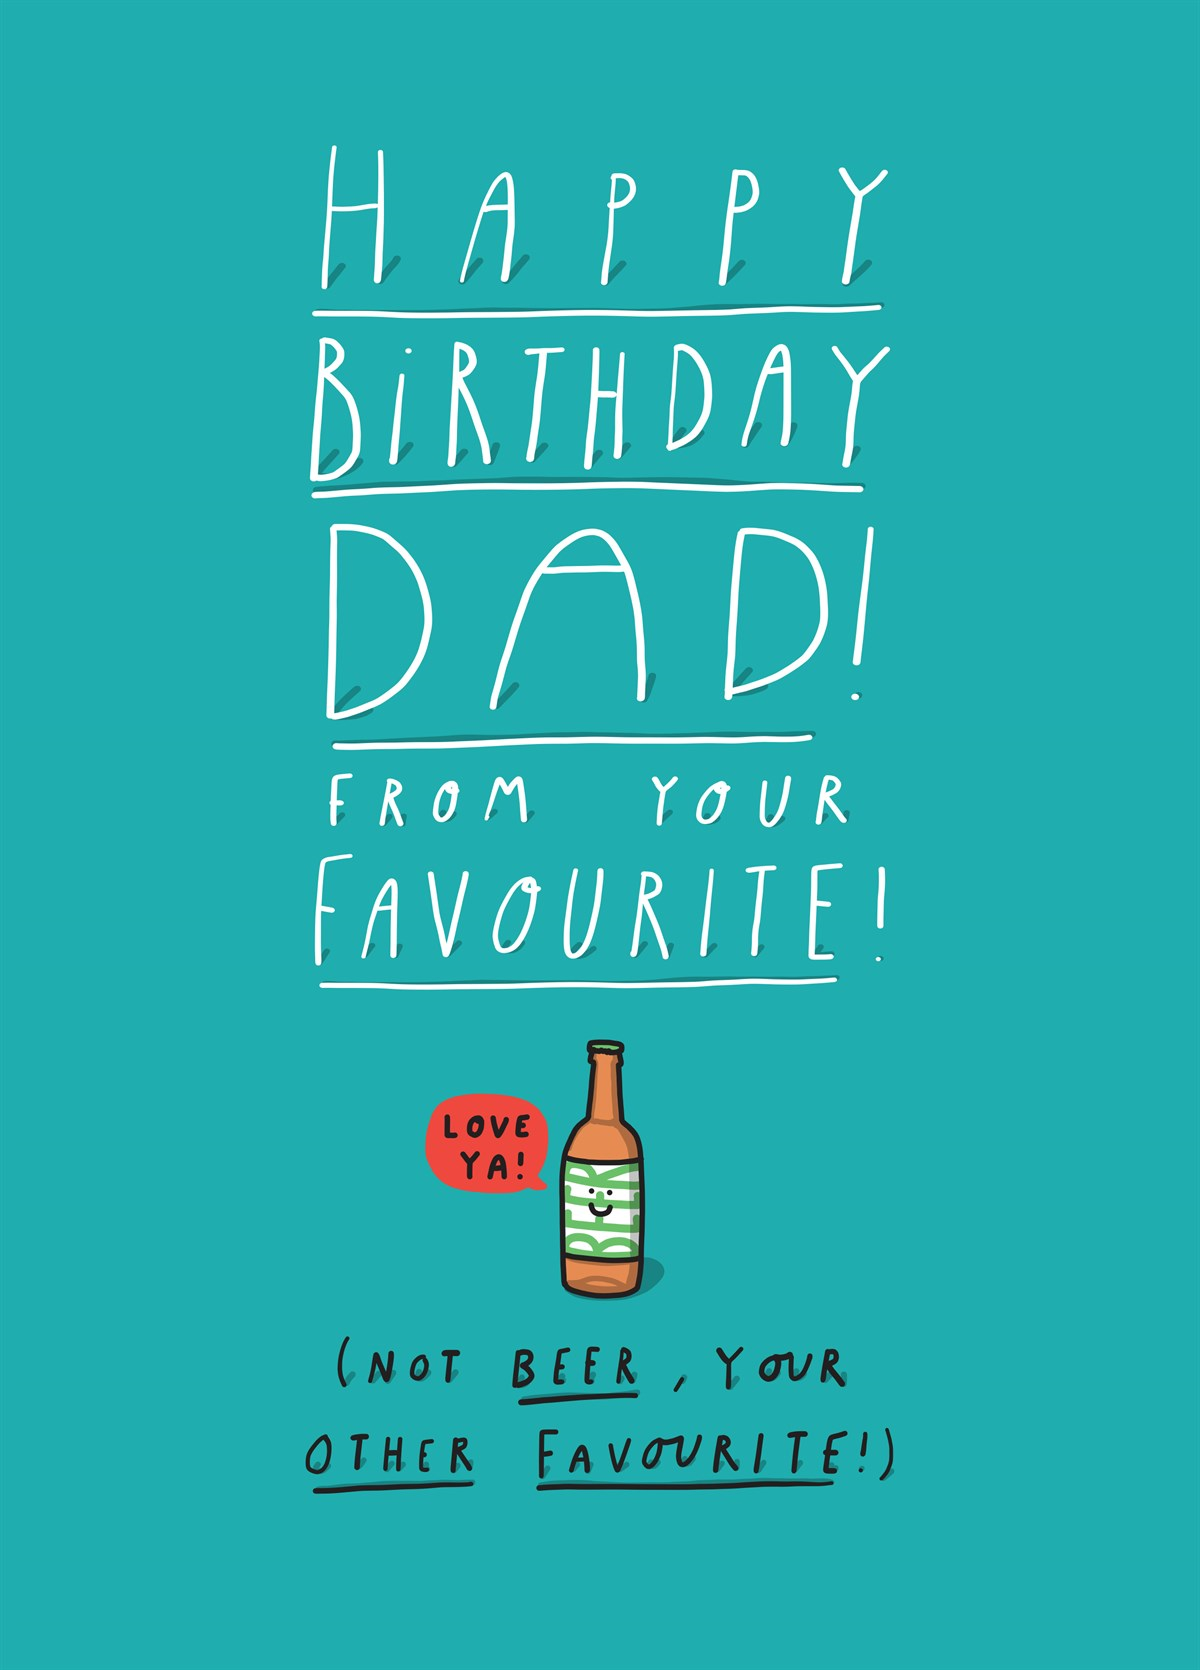 Happy Birthday Cards For Dad, Greetings And Images